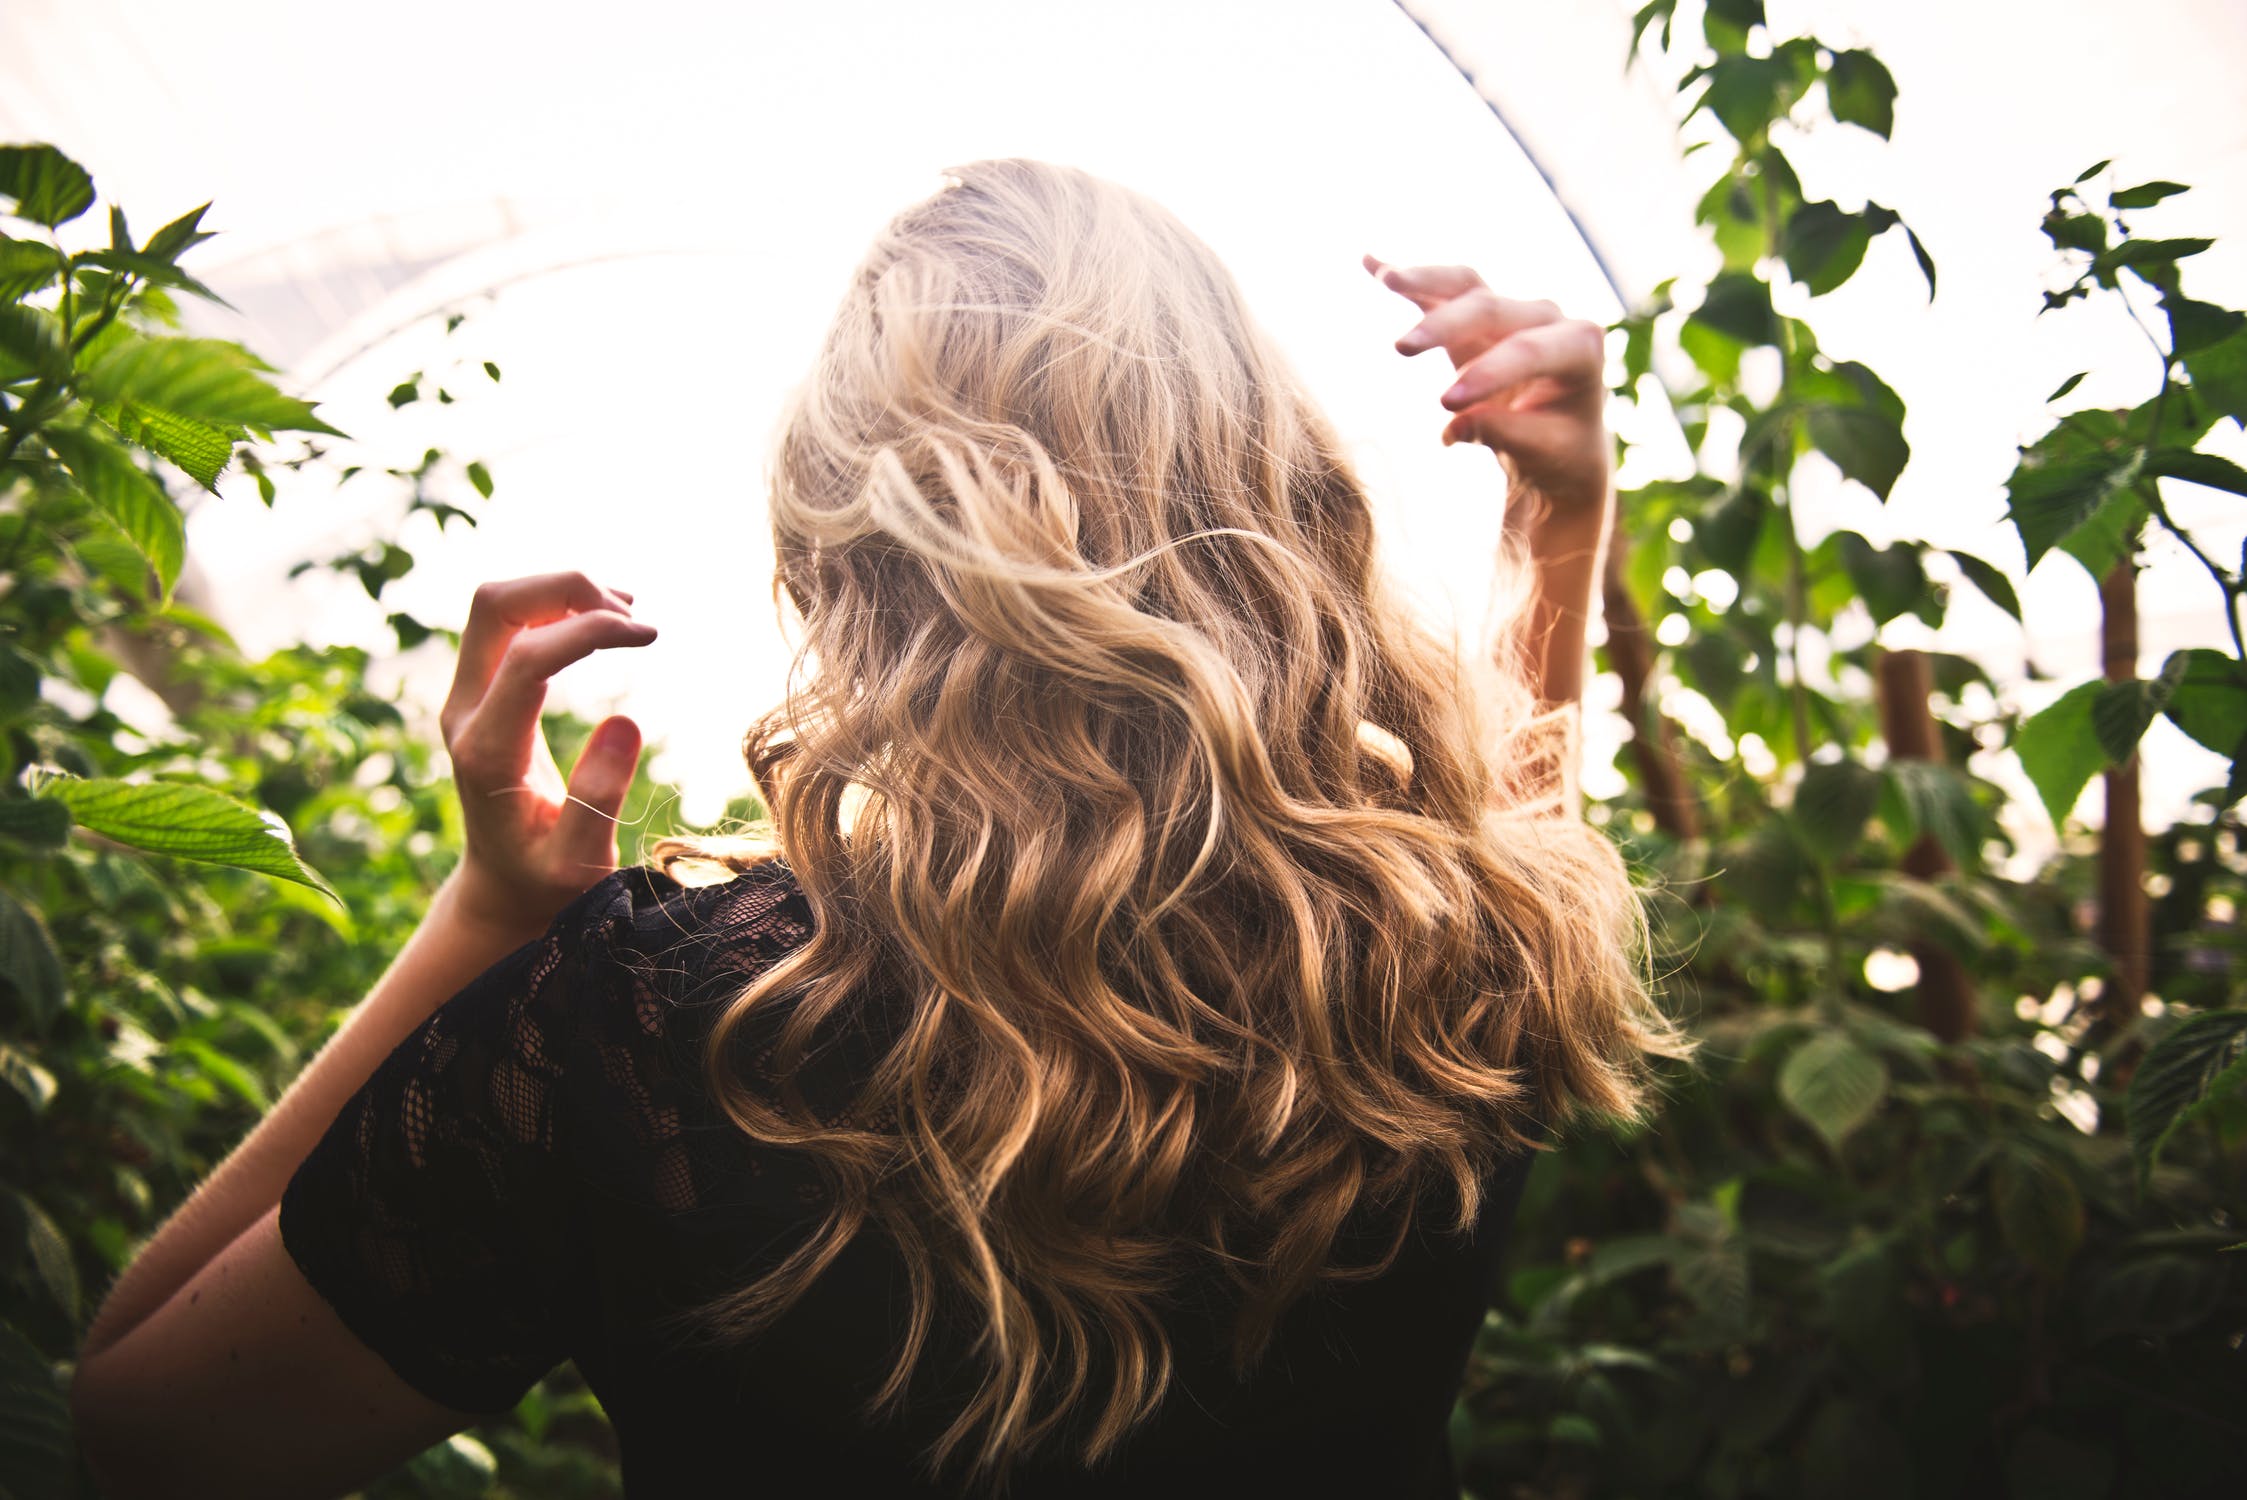 Making a Case for Hand-tied Hair Extensions